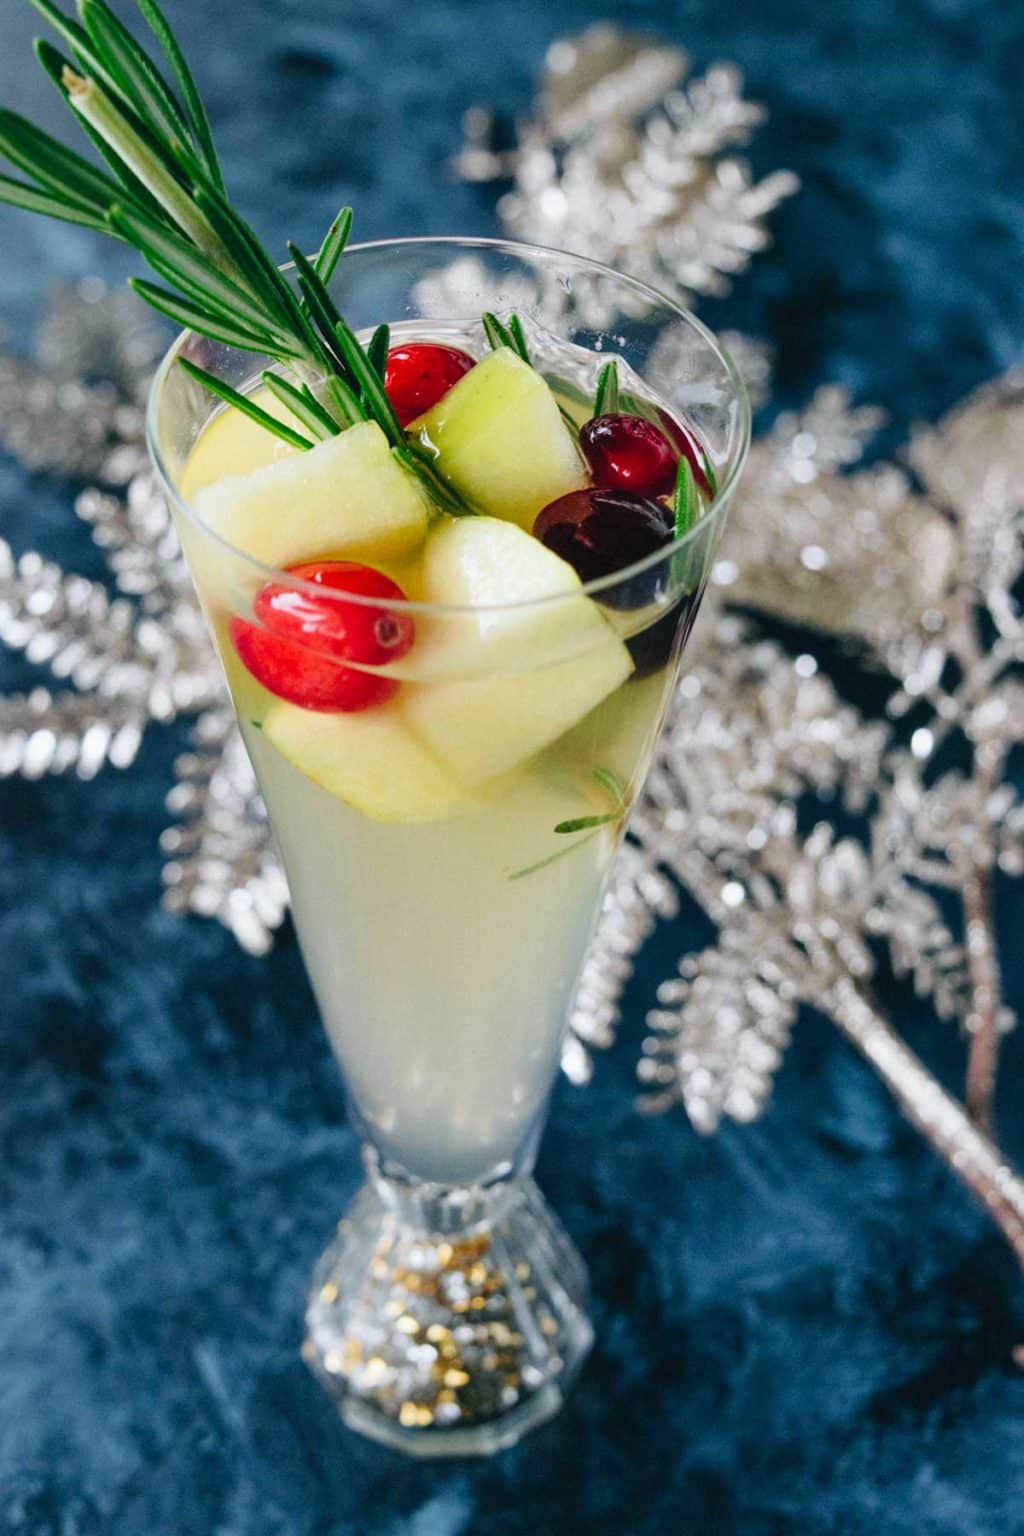 This delicious Christmas Sangria is so easy to make and tastes incredible! Infused with rosemary, apple cider, and fruit this healthier holiday beverage screams holiday fun!